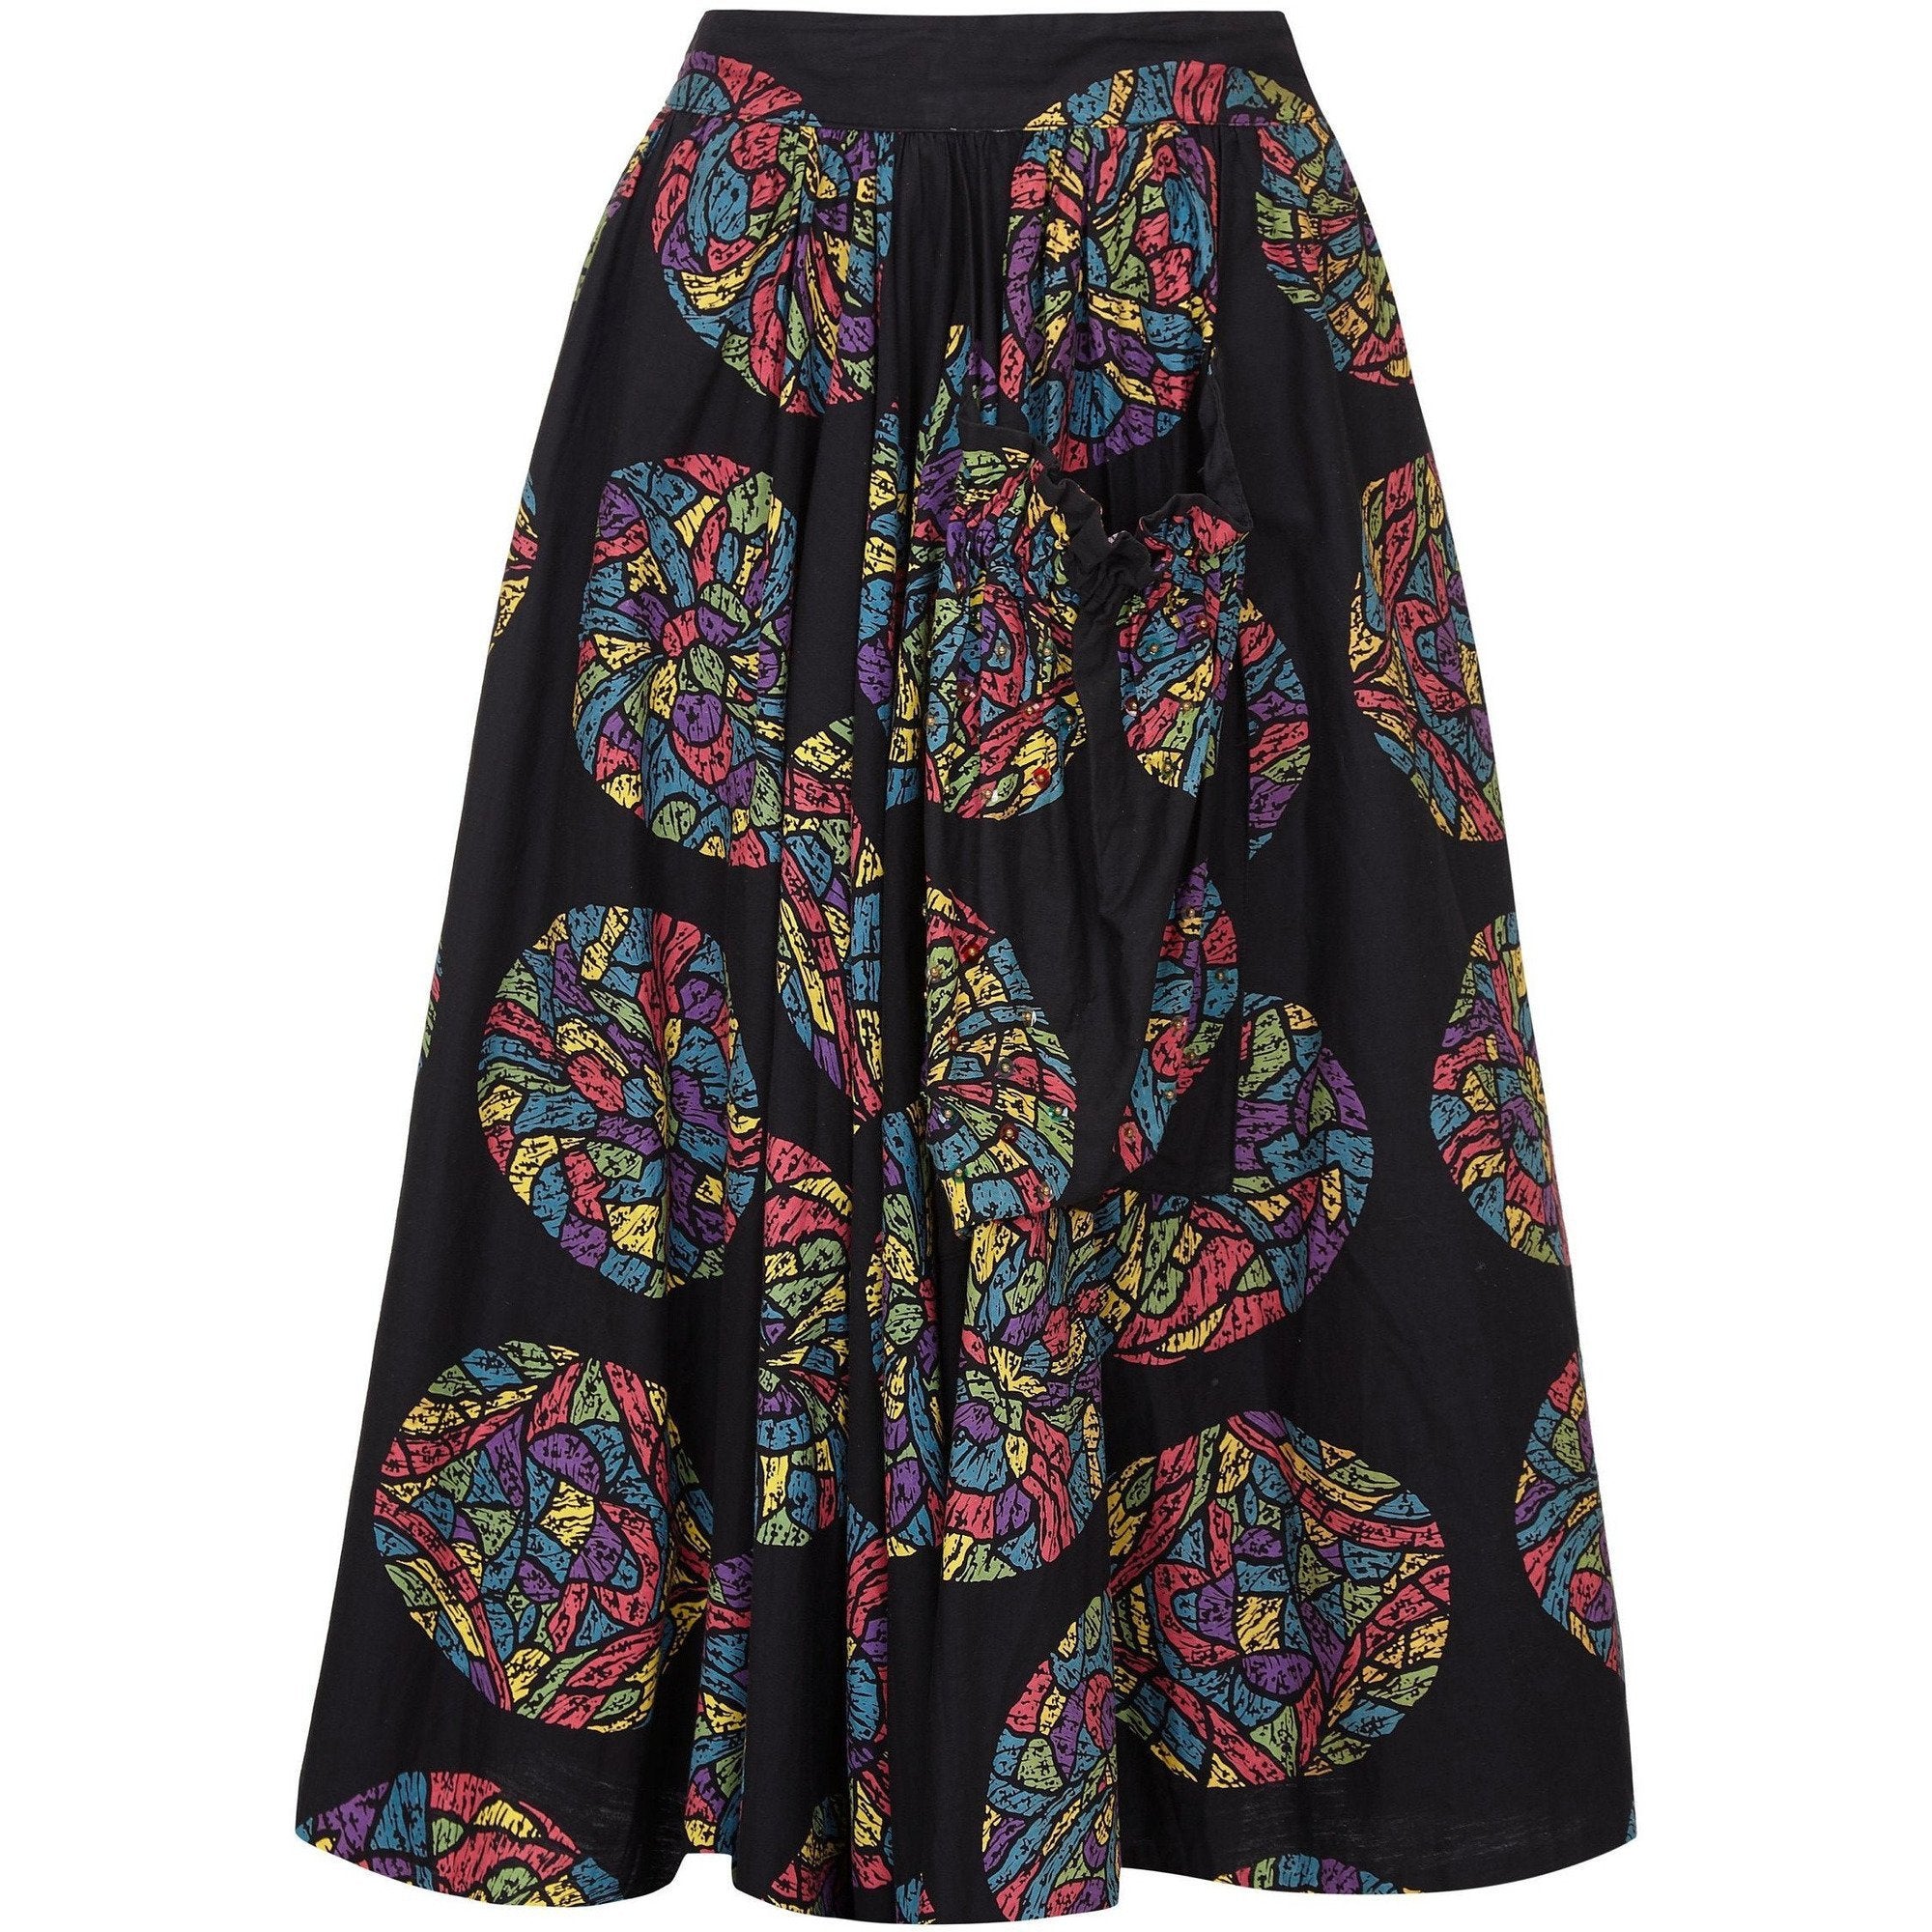 1950s Mexican Stained Glass Novelty Print Festival Skirt